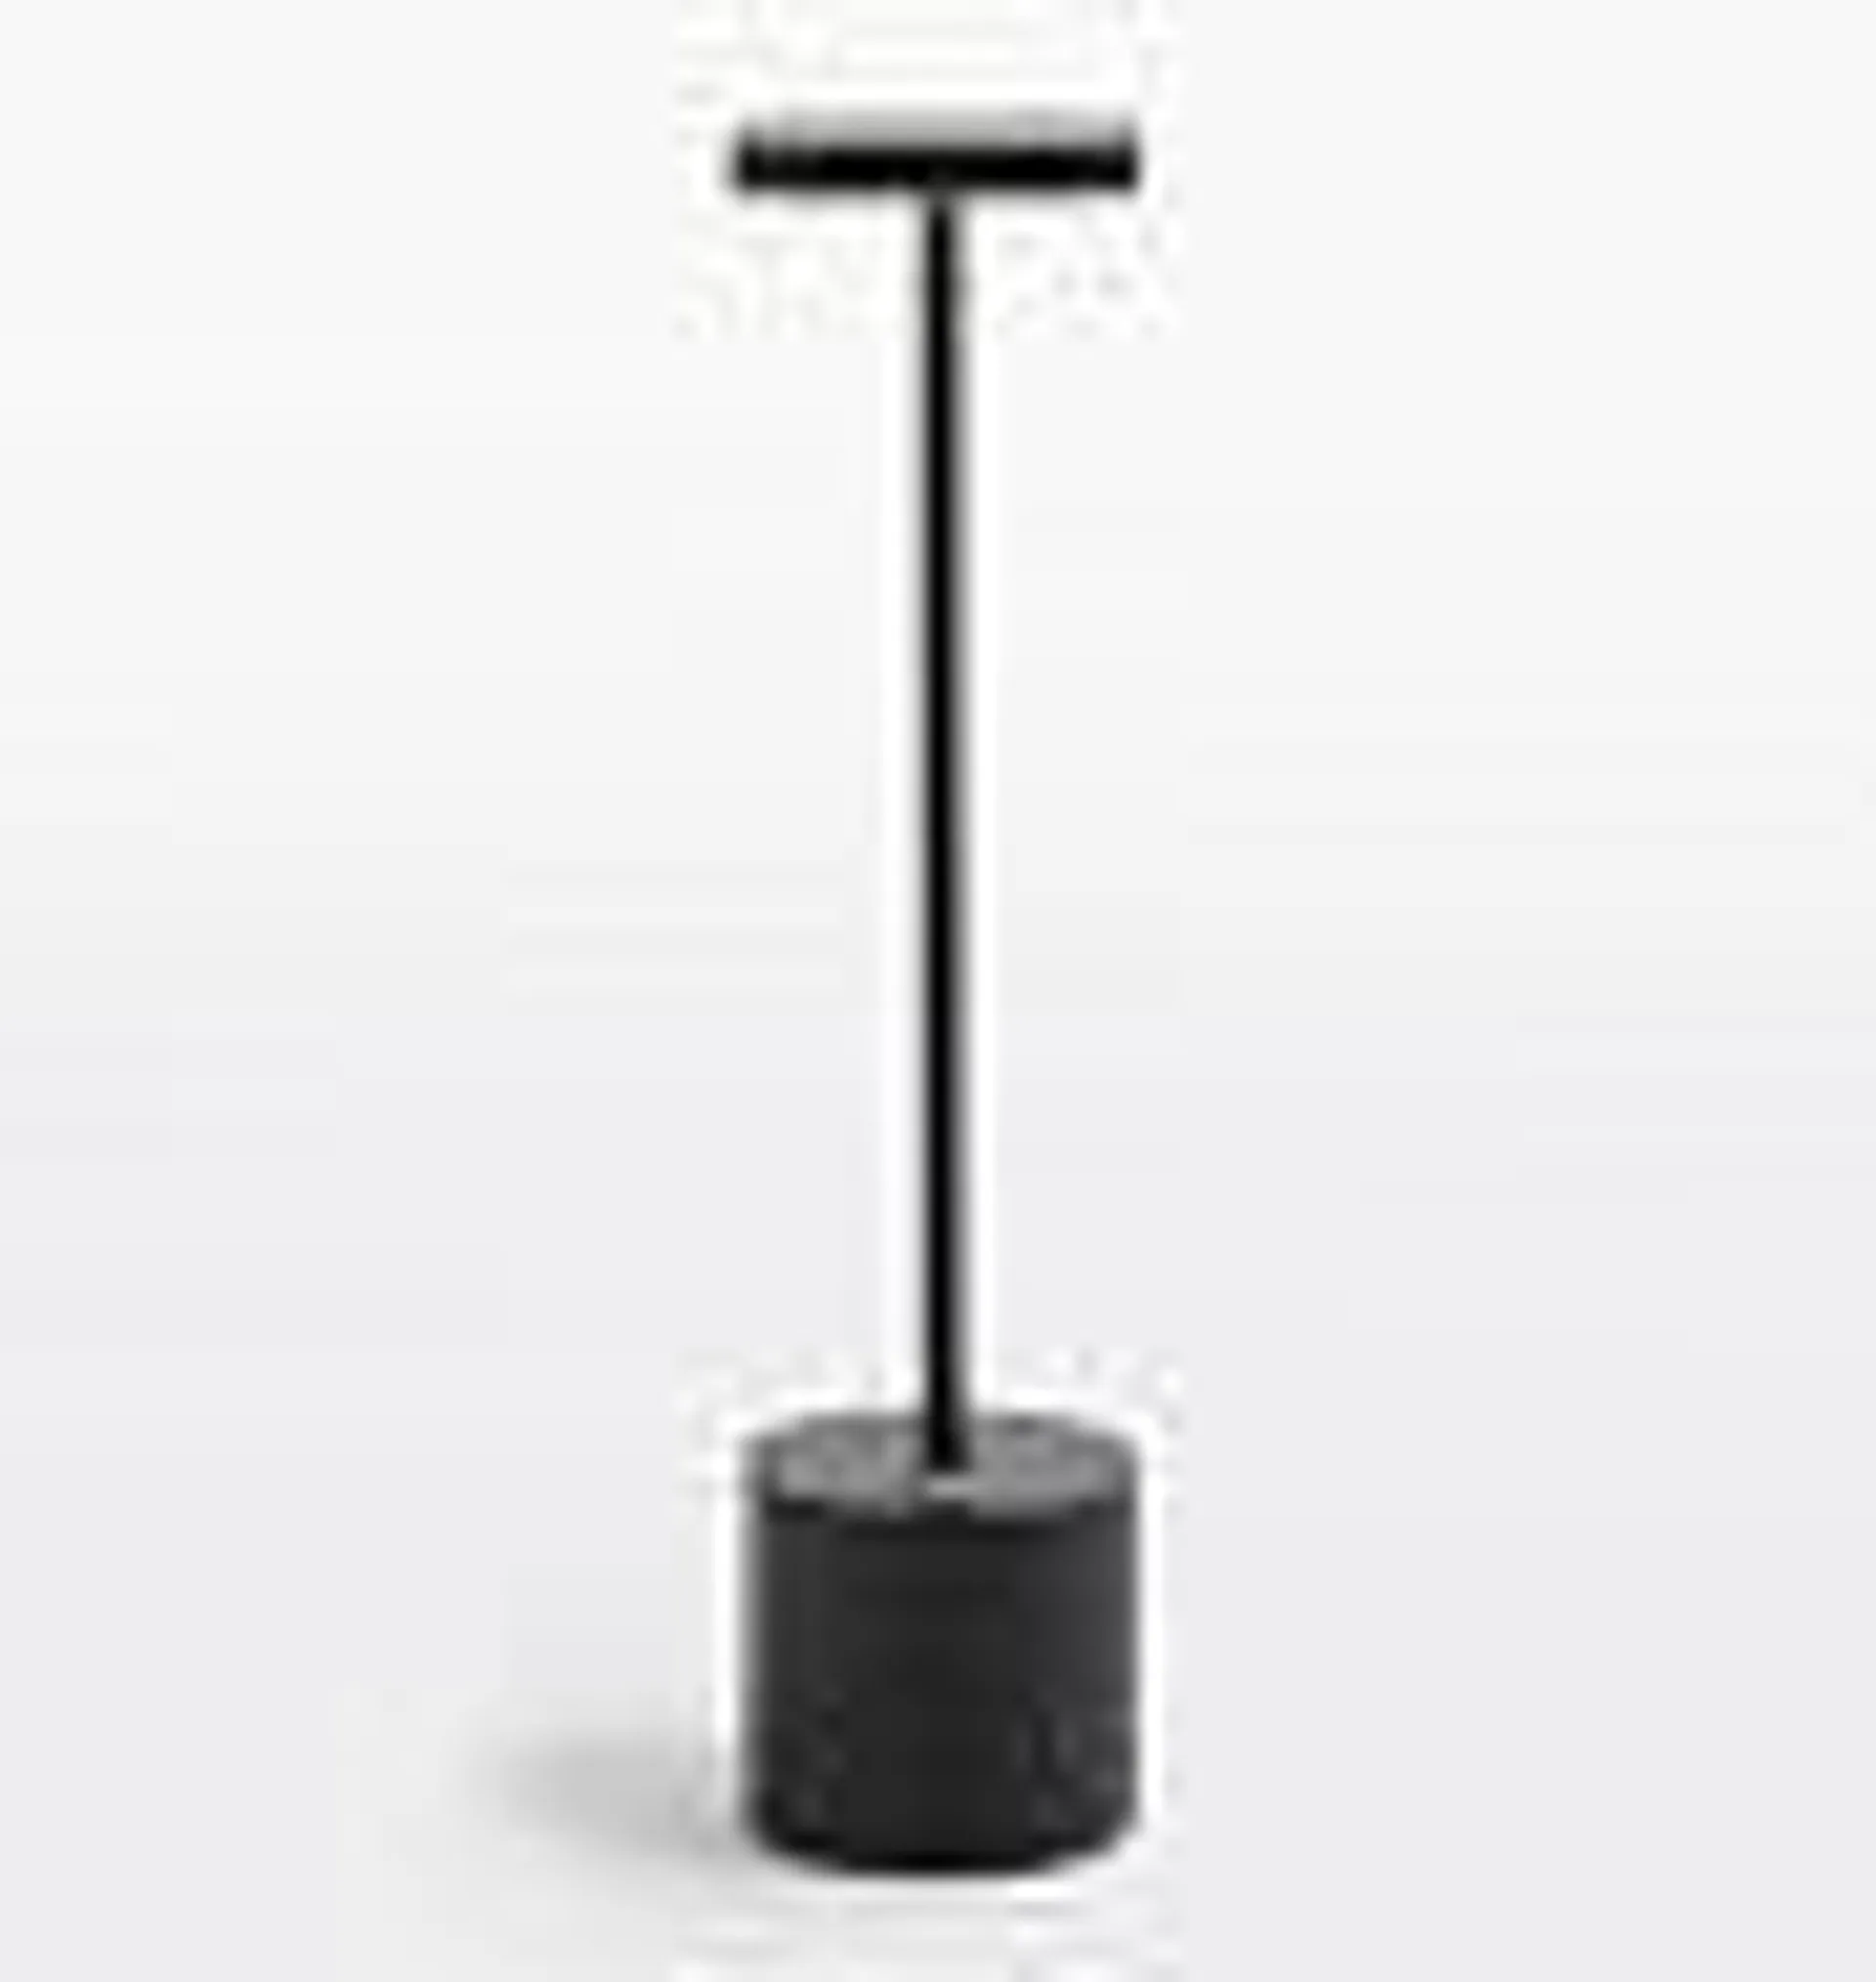 Holden Outdoor Rechargeable LED Table Lamp